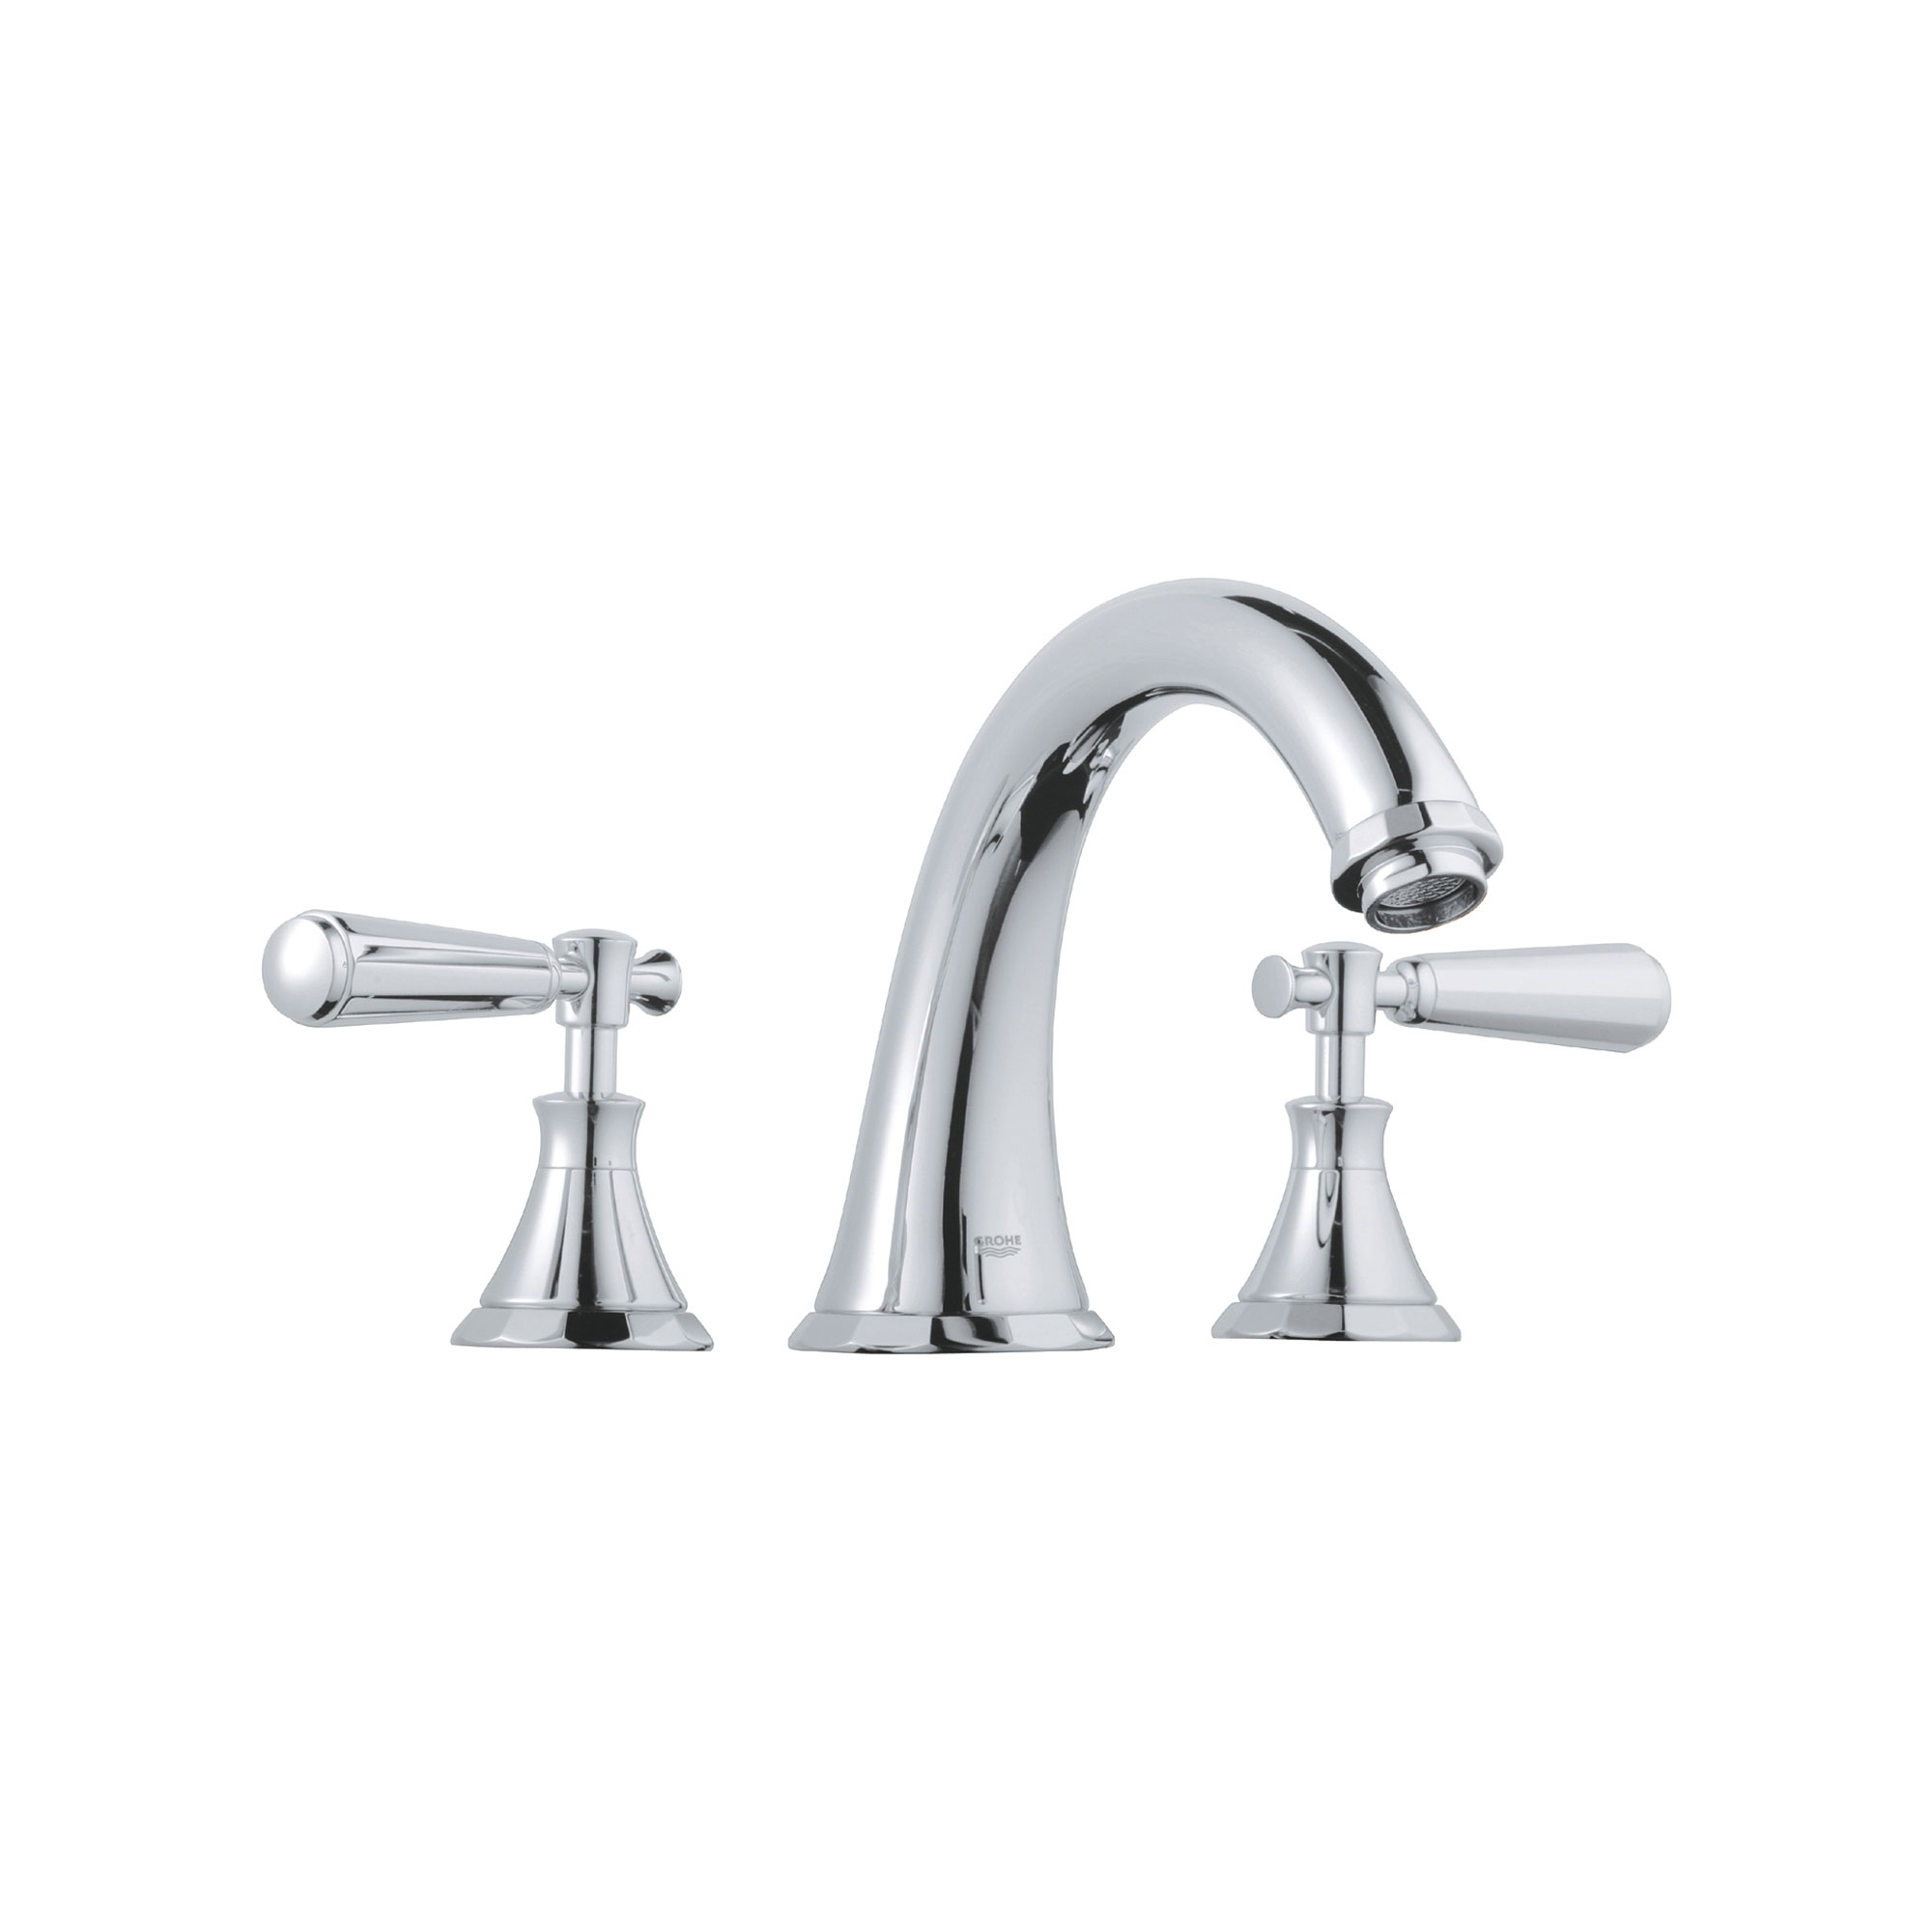 3-Hole 2-Handle Deck Mount Roman Tub Faucet with Hand Shower